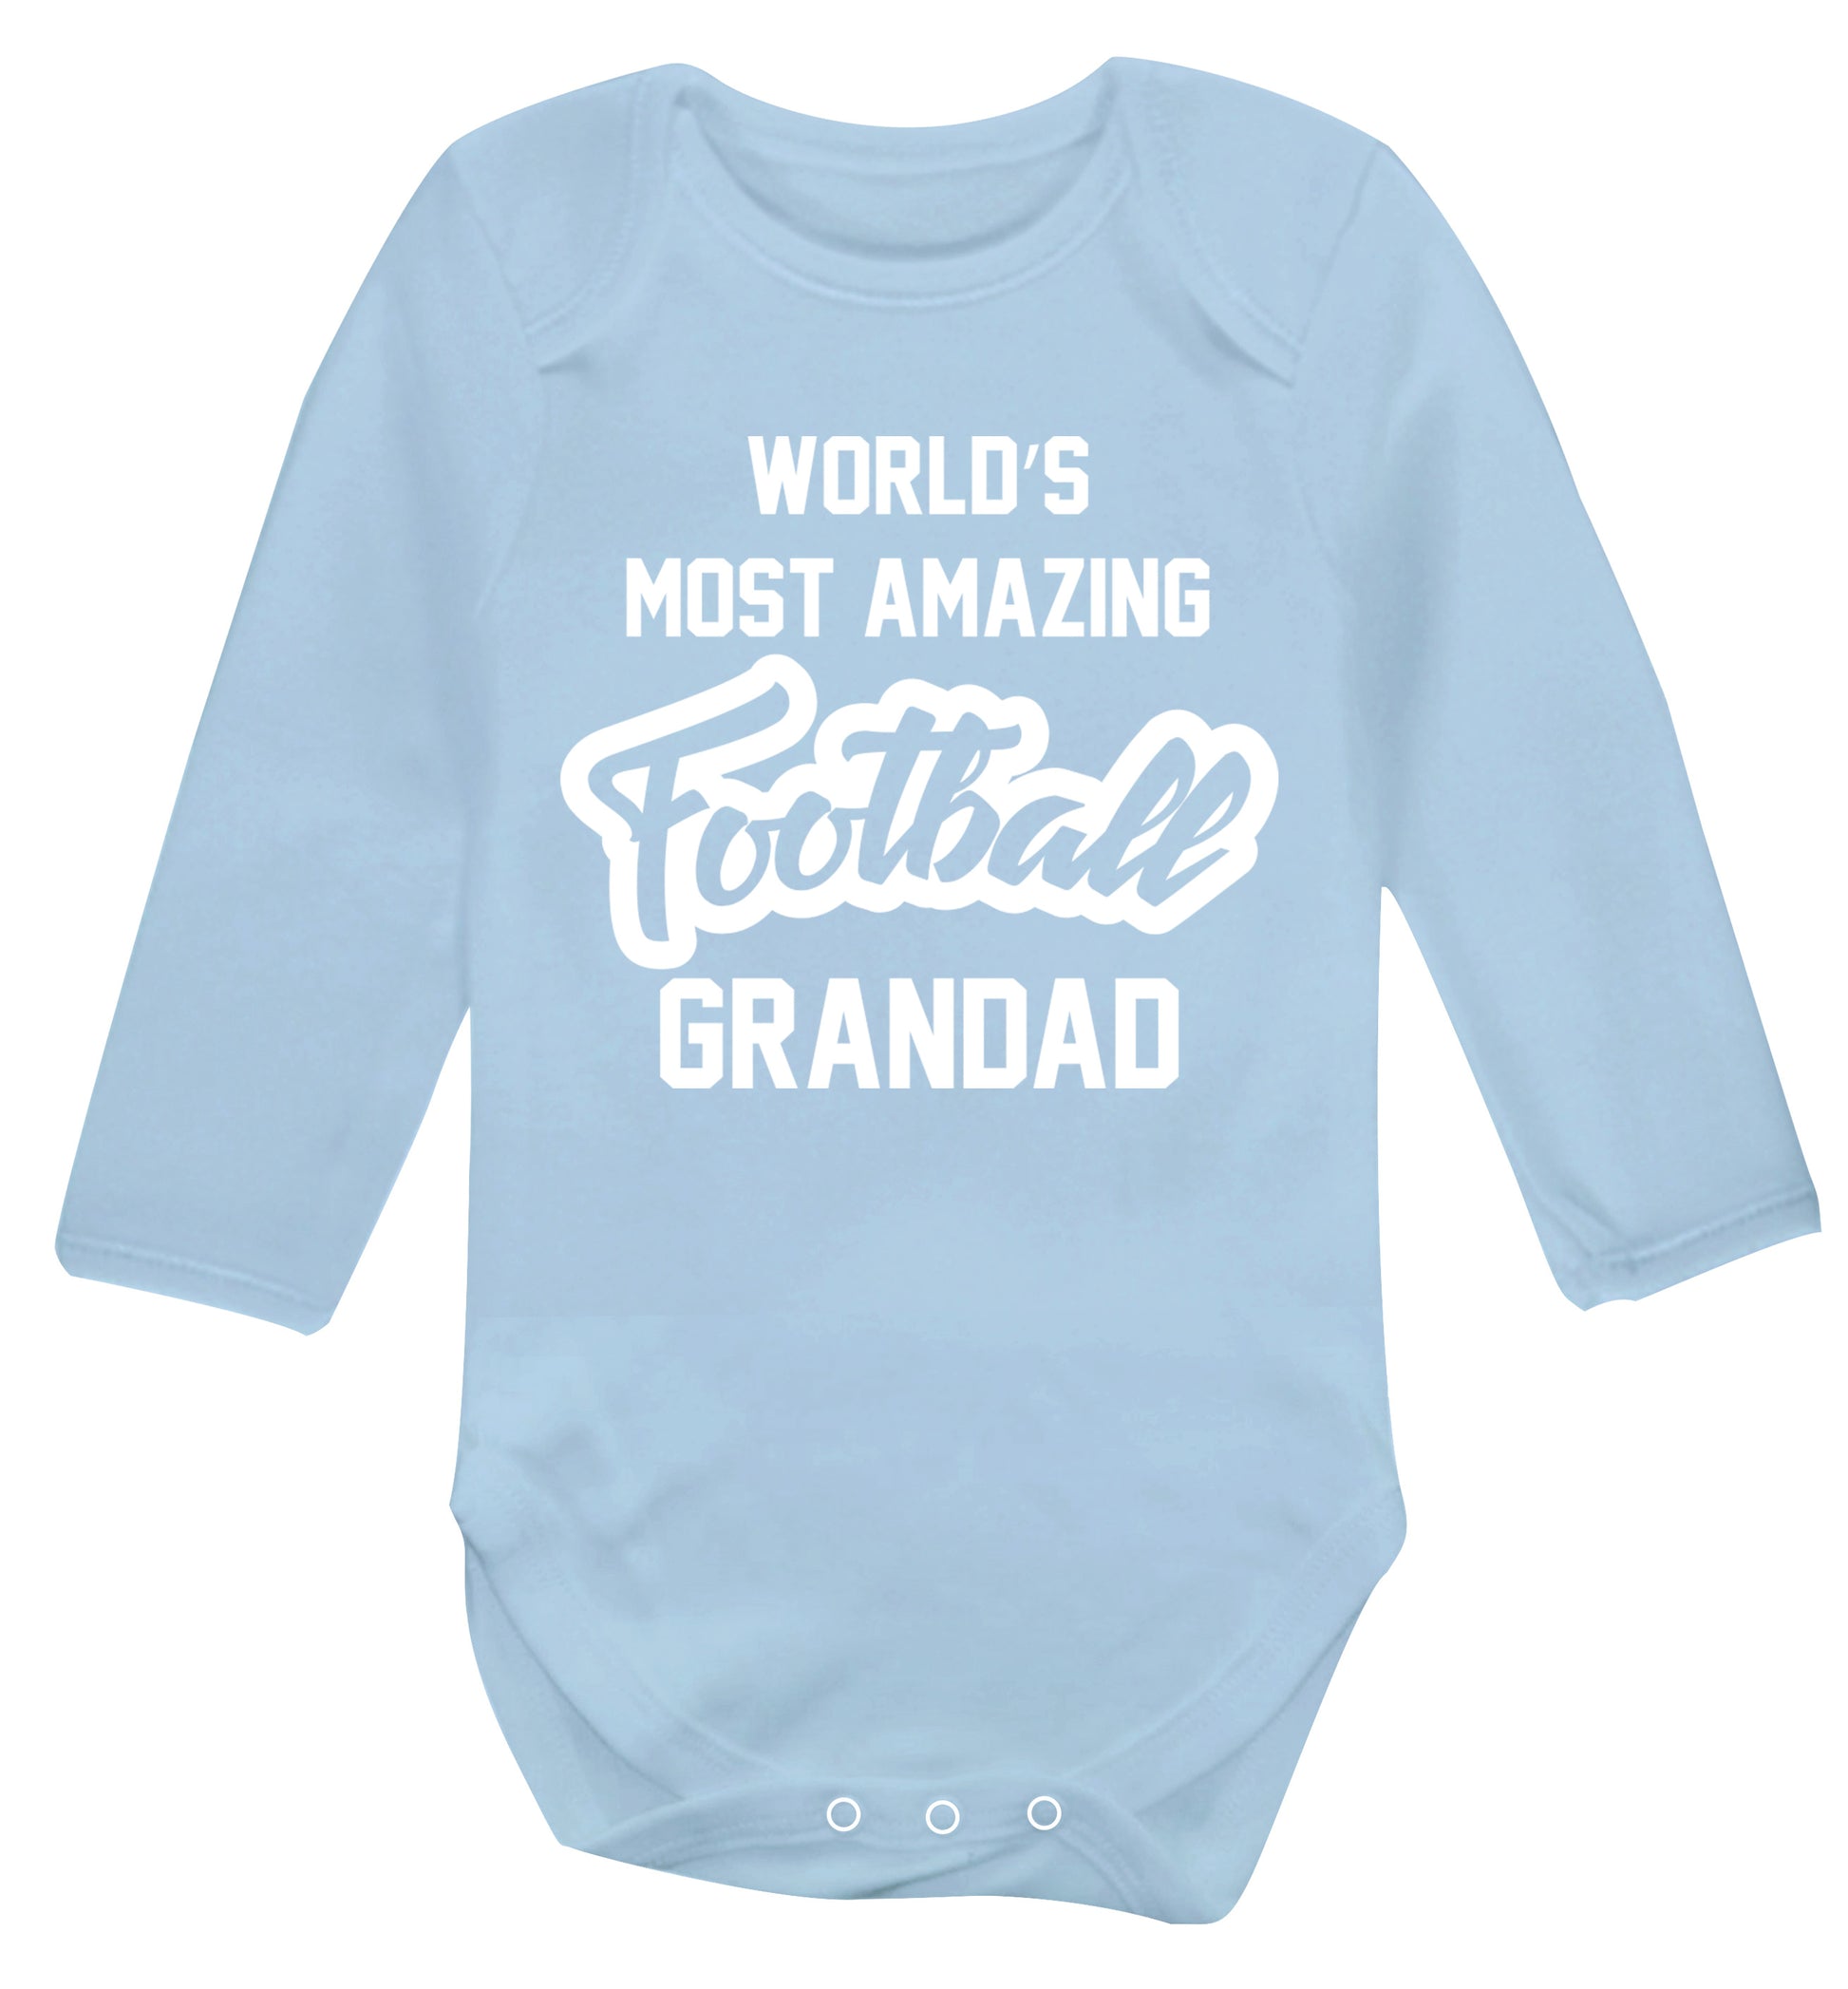 Worlds most amazing football grandad Baby Vest long sleeved pale blue 6-12 months